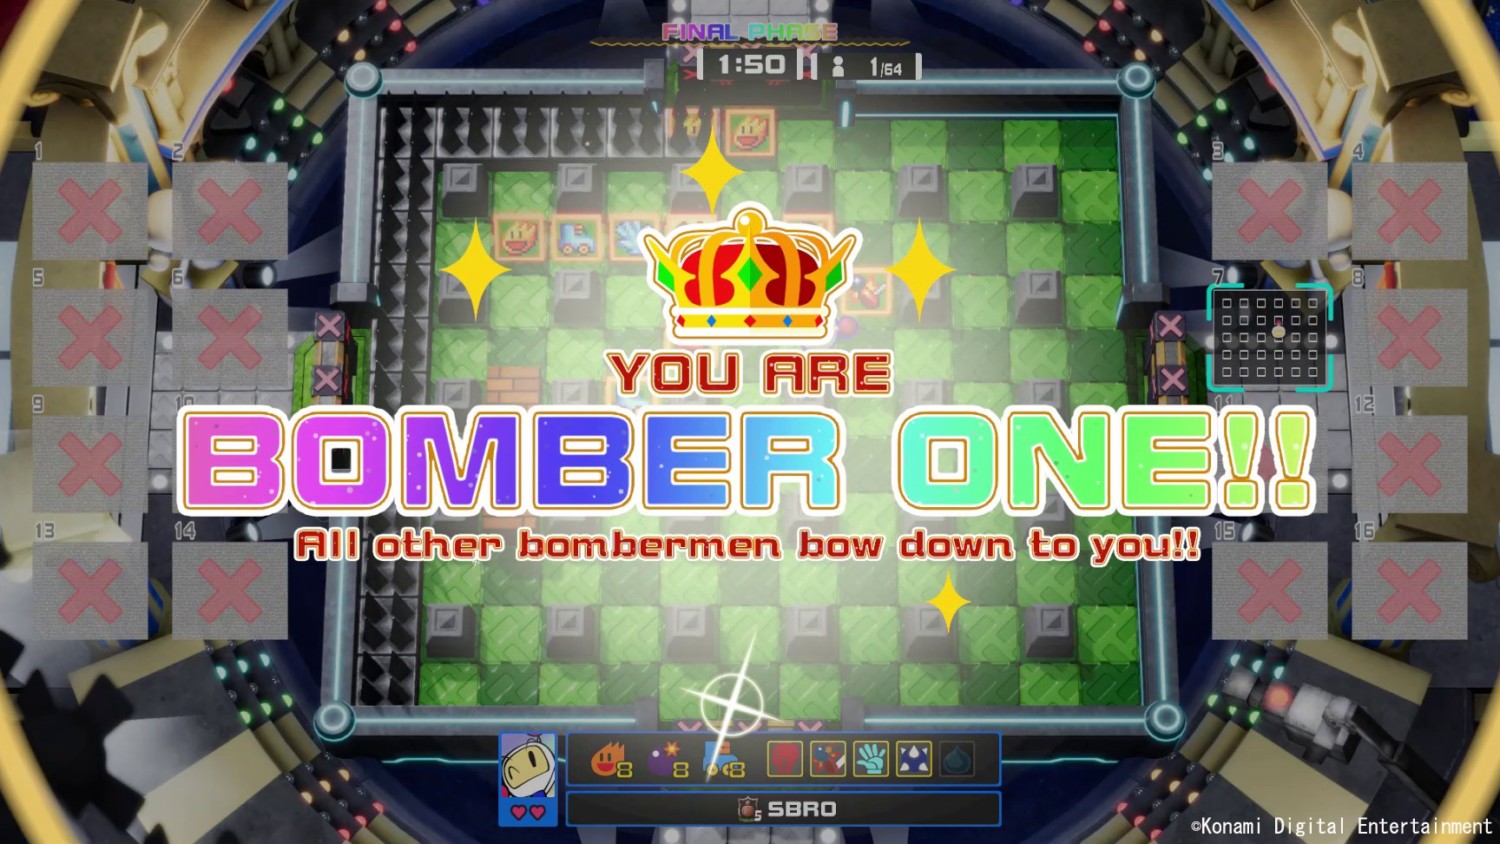 Super Bomberman R Online will be shutting down this year, but the